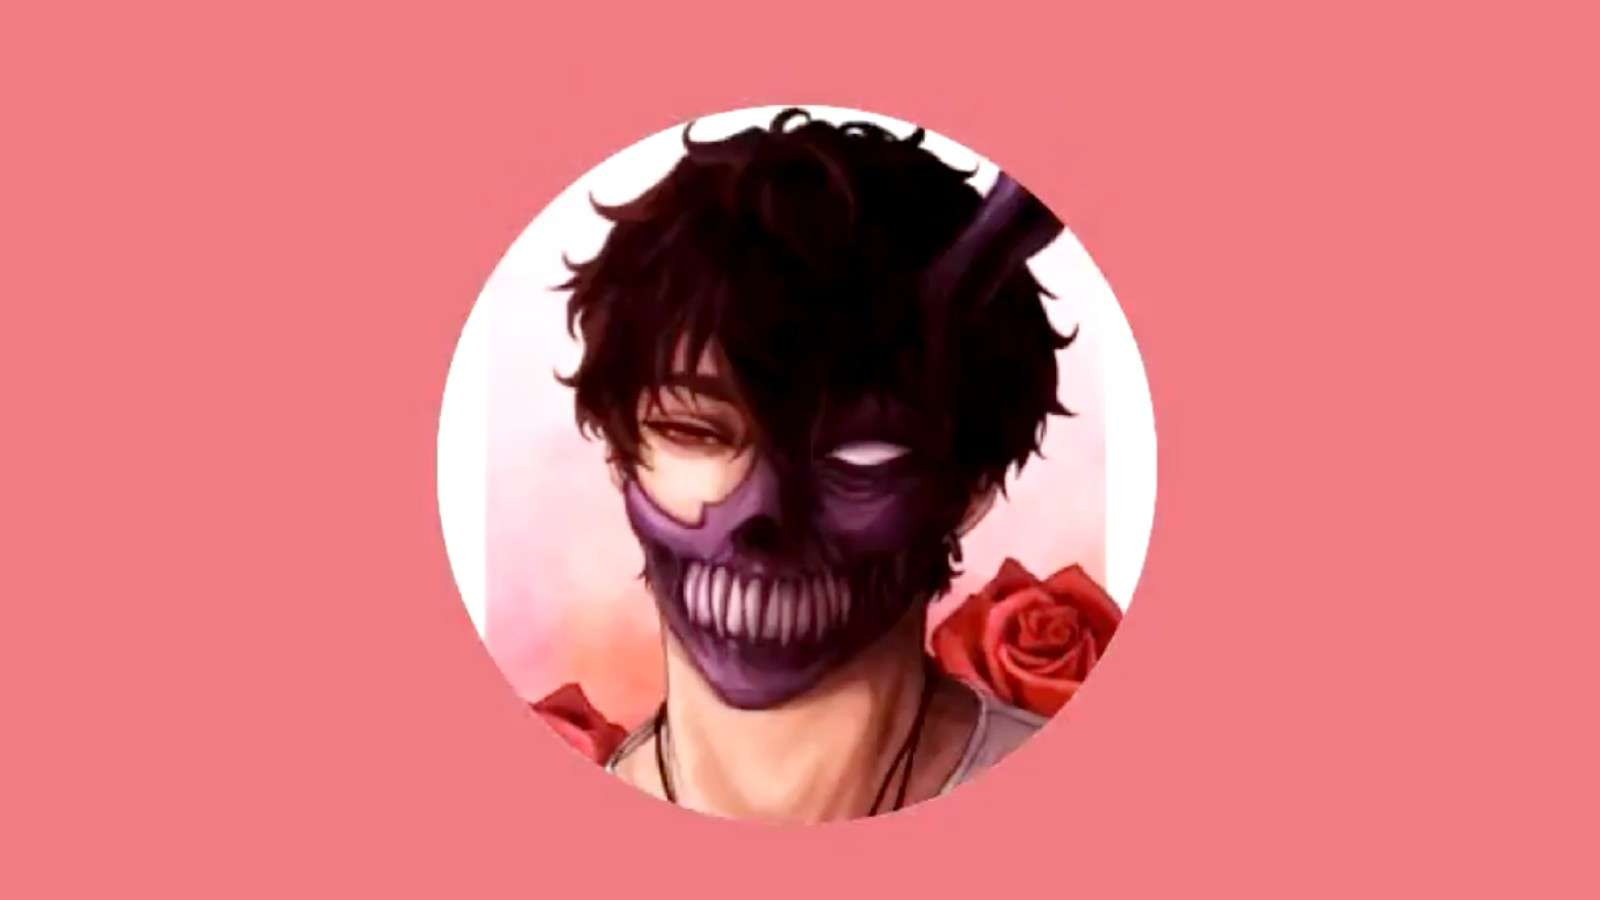 Corpse Husband's profile picture in a circle on a pink background